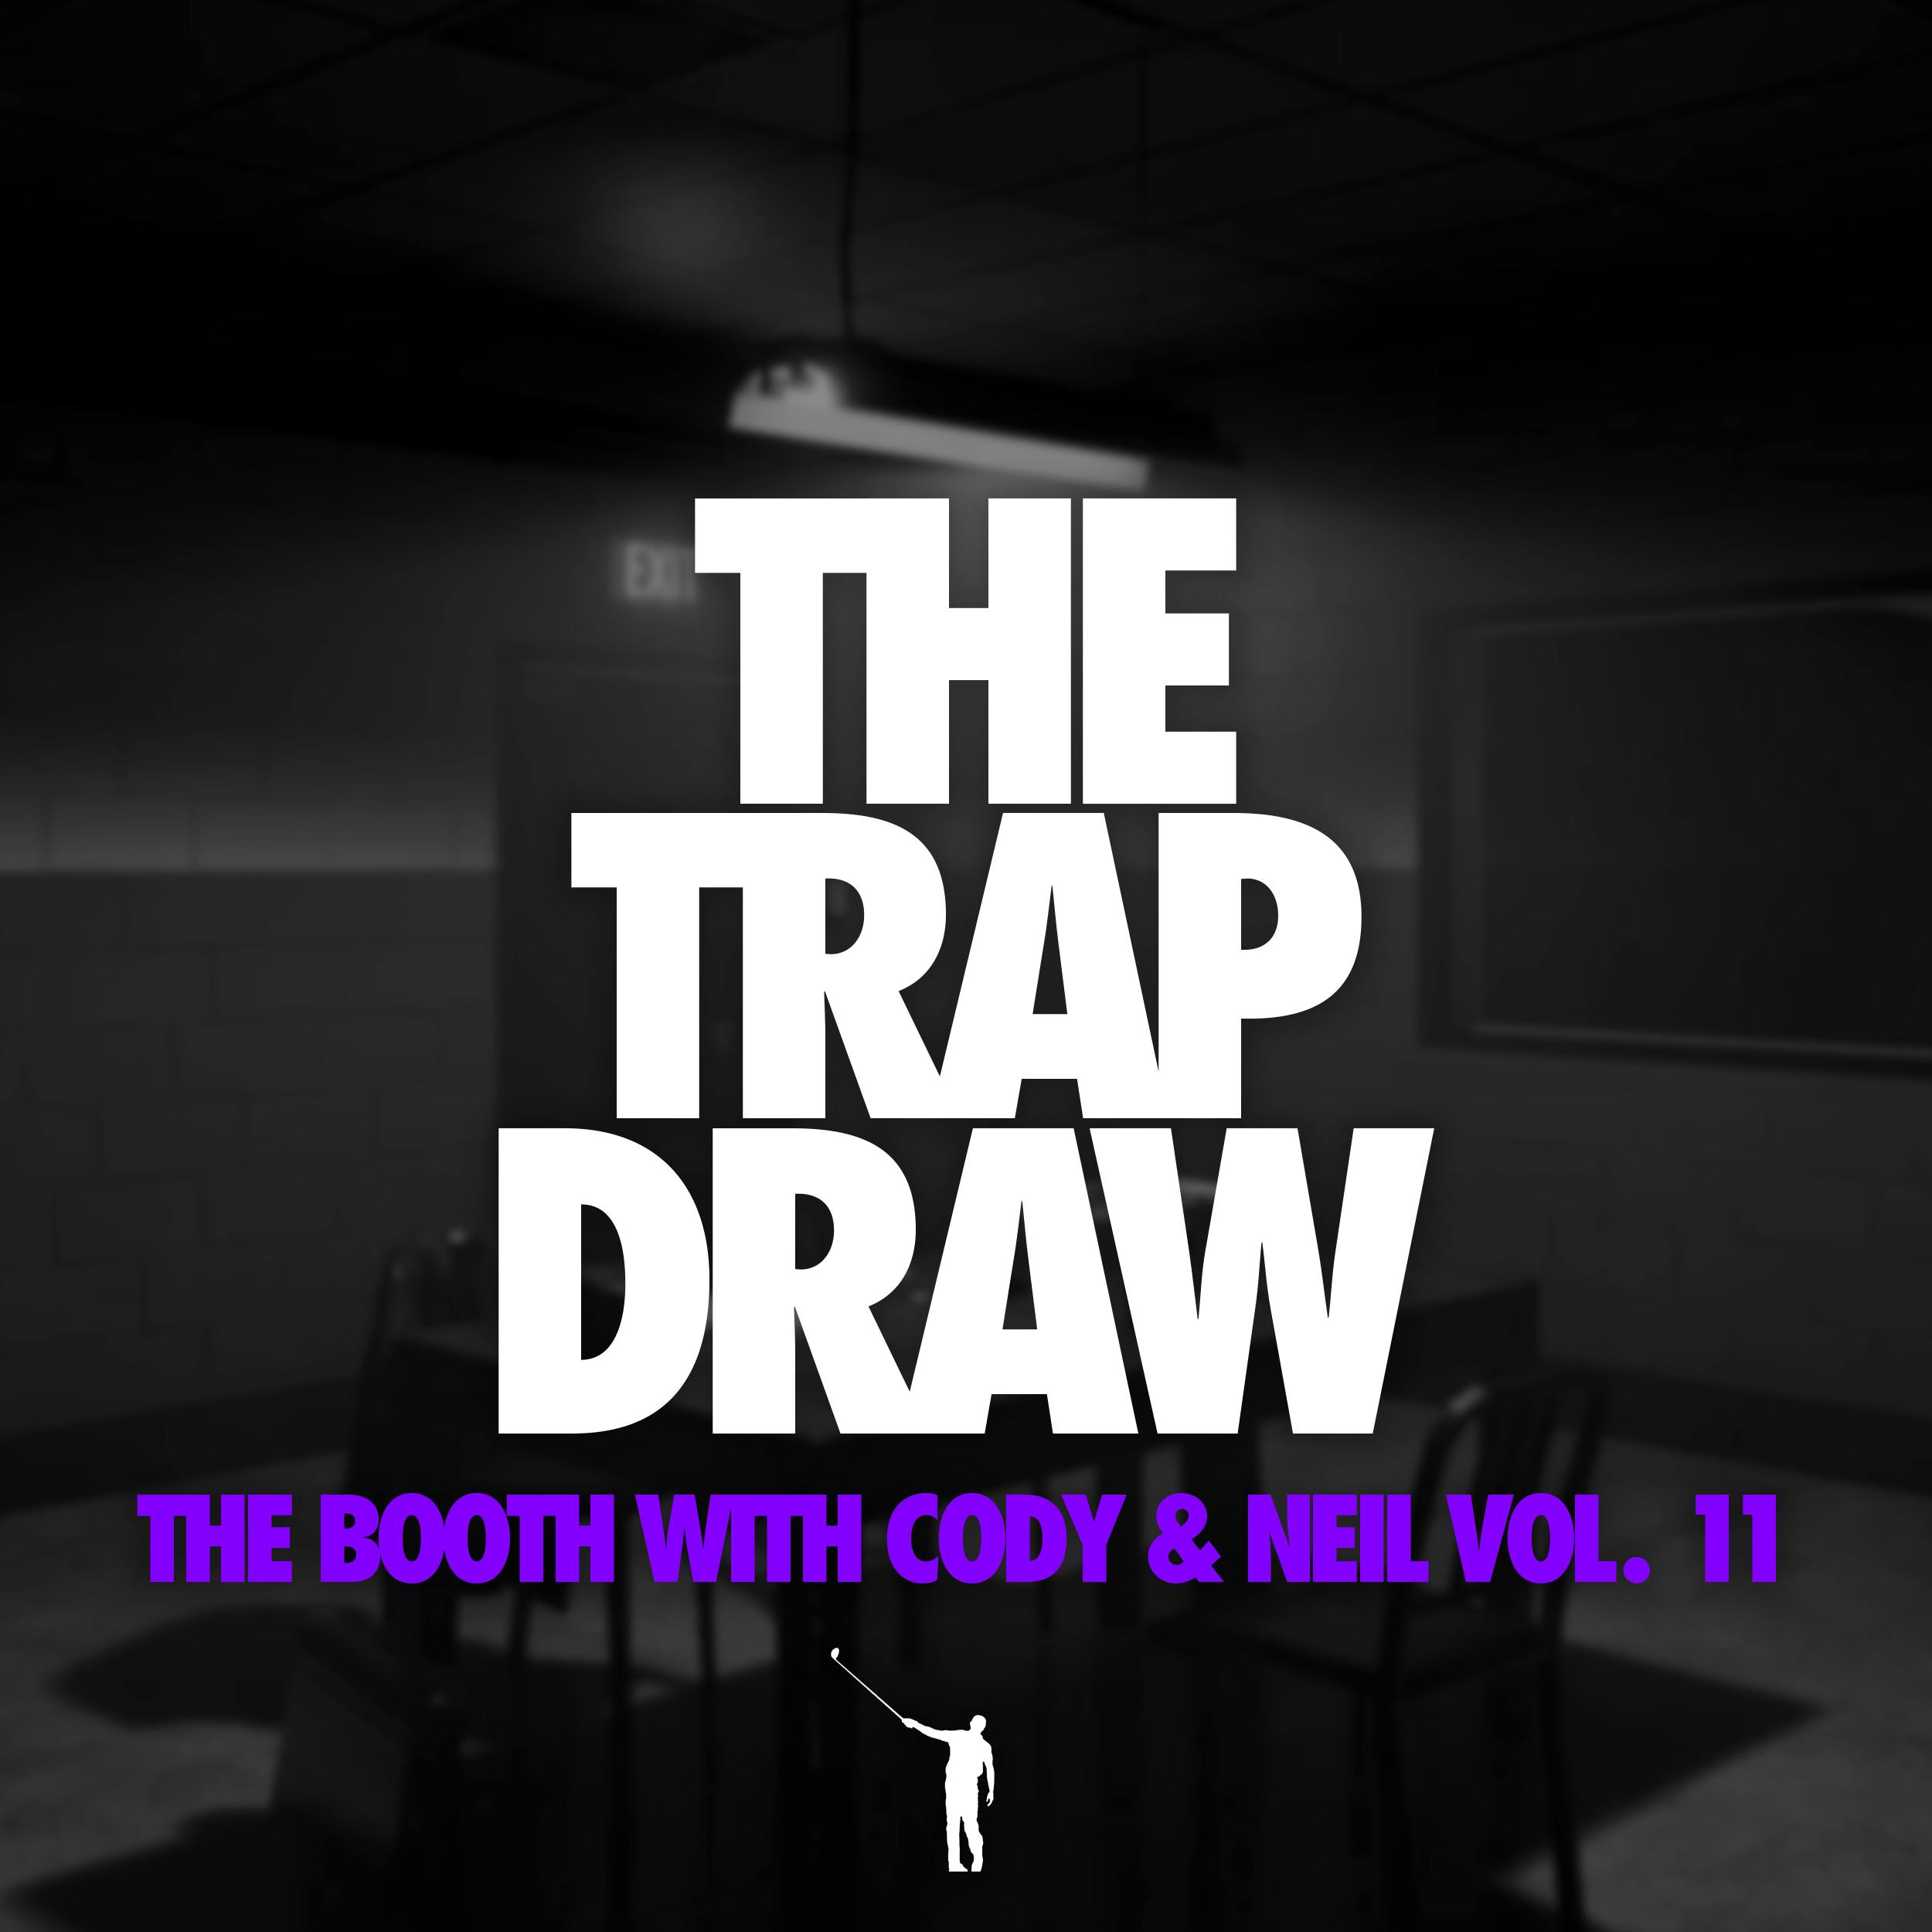 Episode 275: The Booth Vol. 11